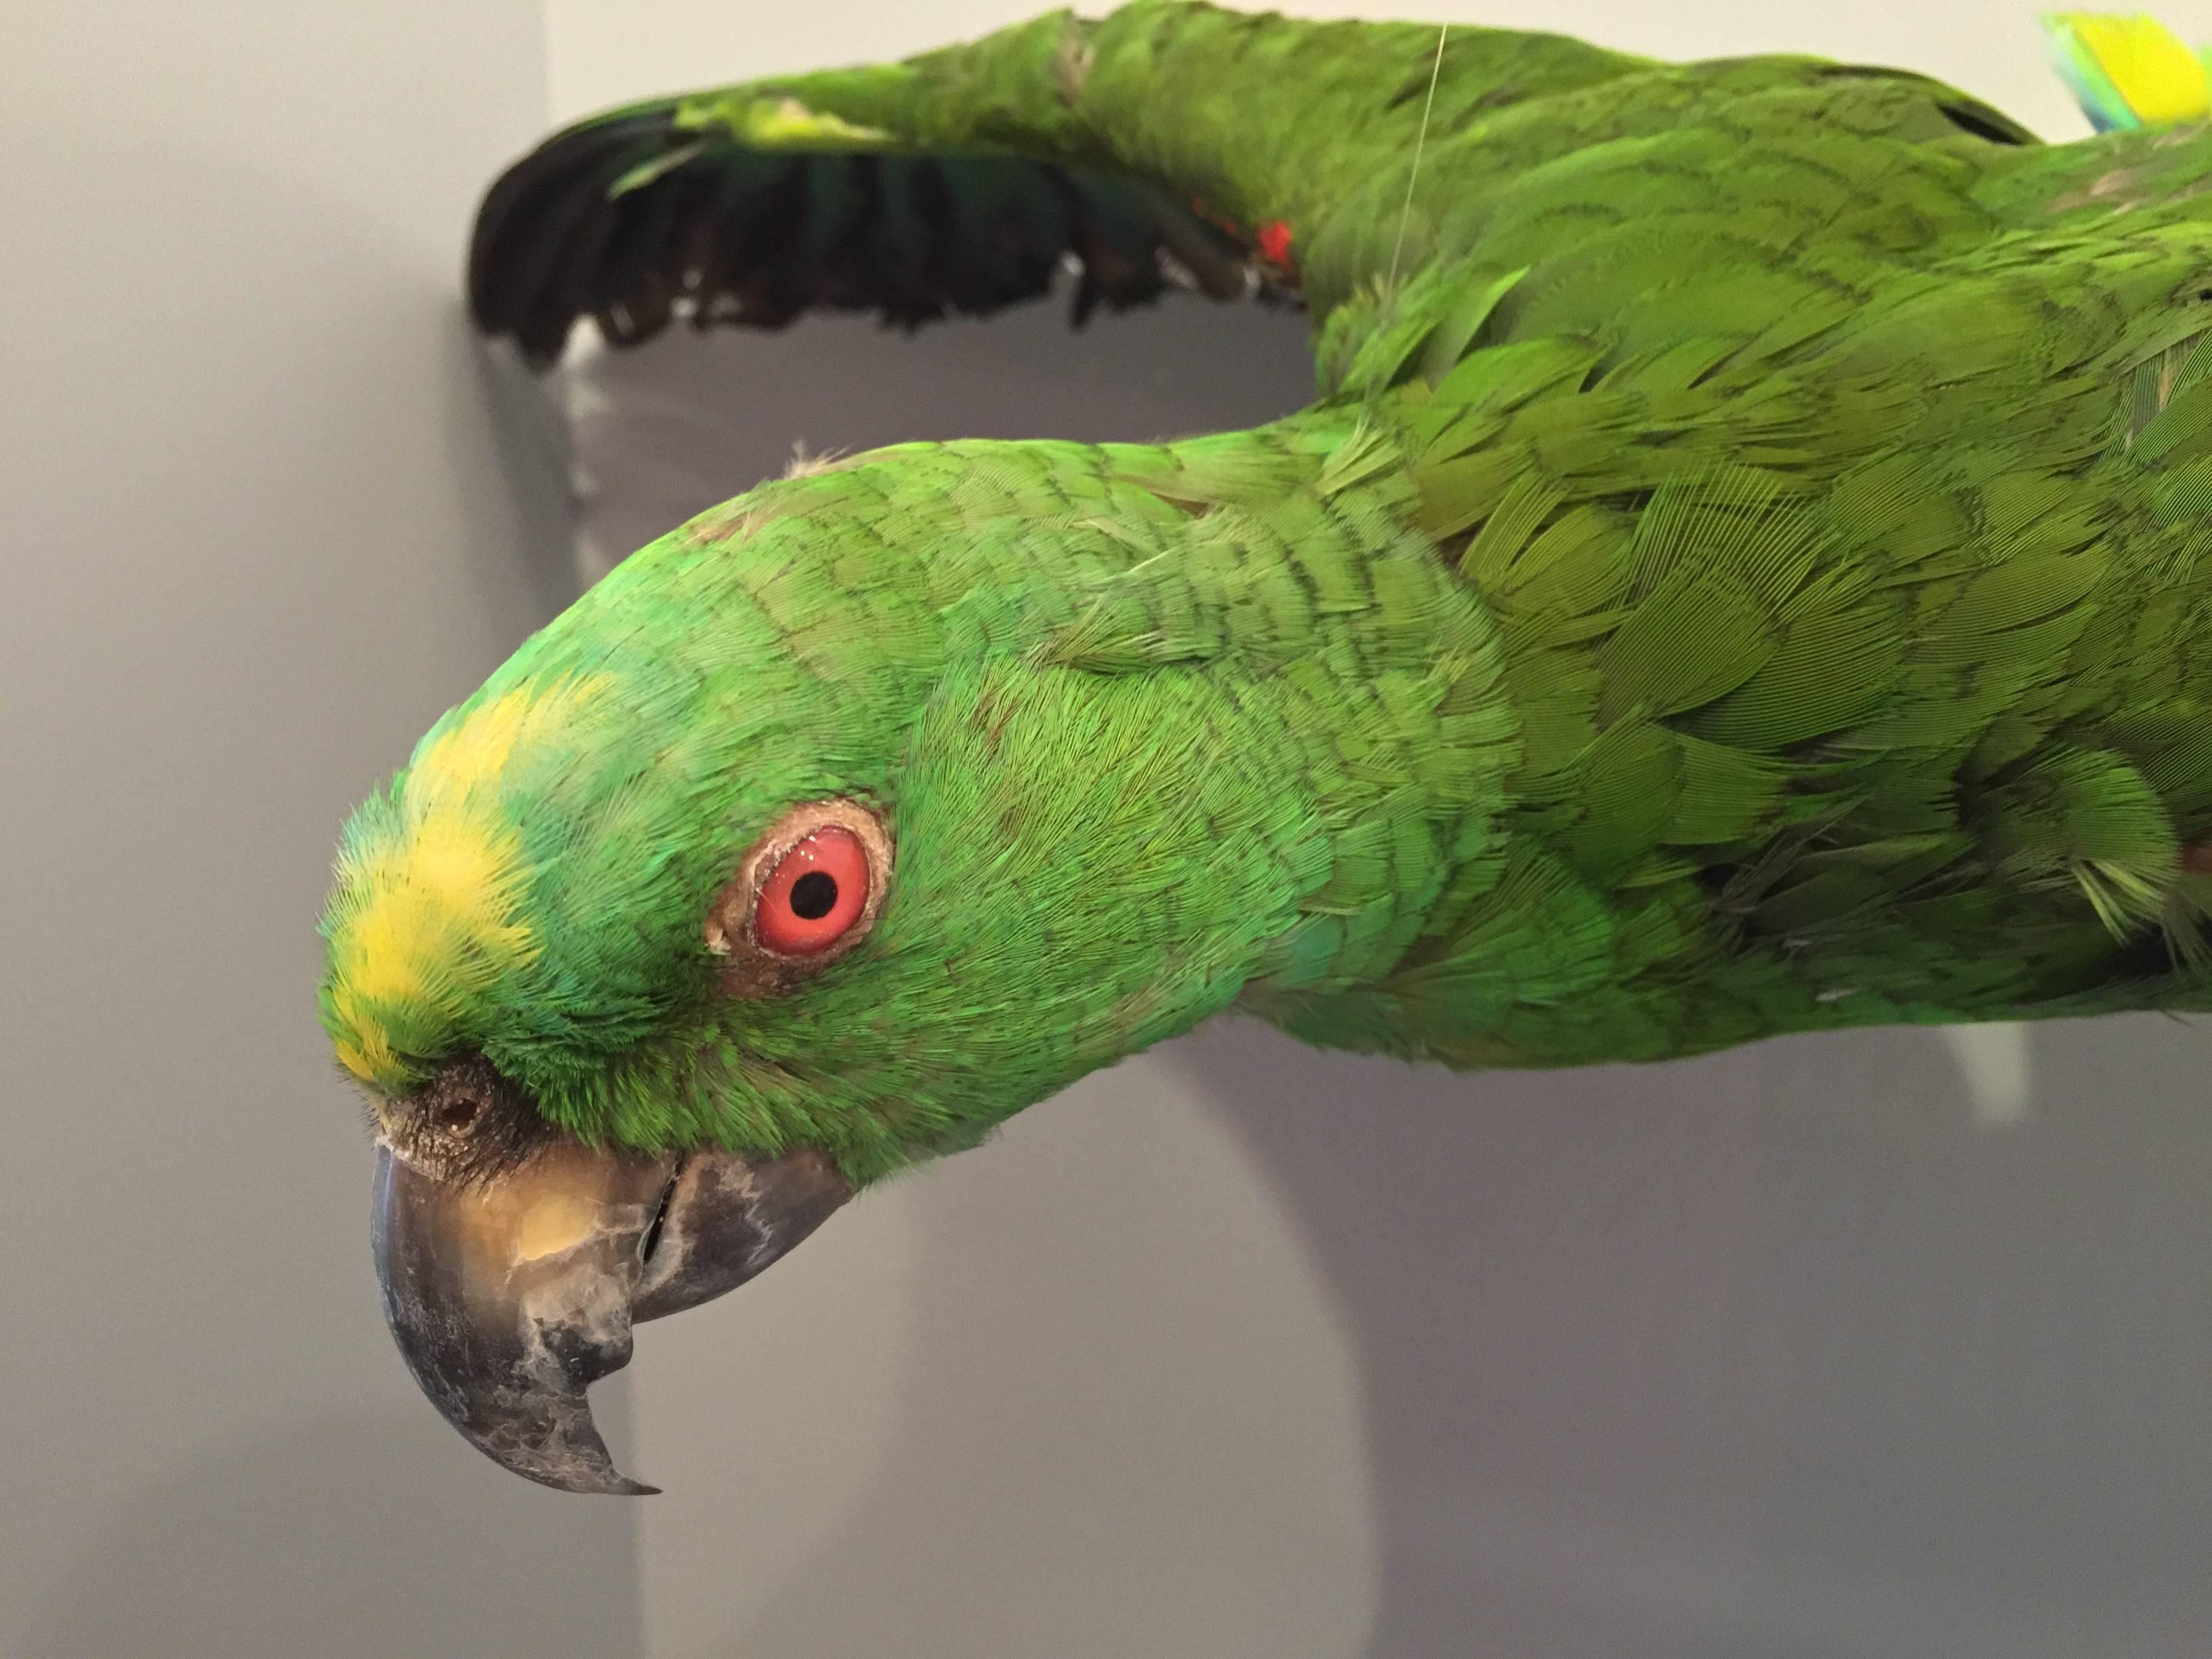 Colorful flying Amazon taxidermy parrot, mounted in a flying pose using invisible string that can be suspended from any hook. Amazon parrots can be found throughout South America, Mexico and the Caribbean. This specimen was mounted by our